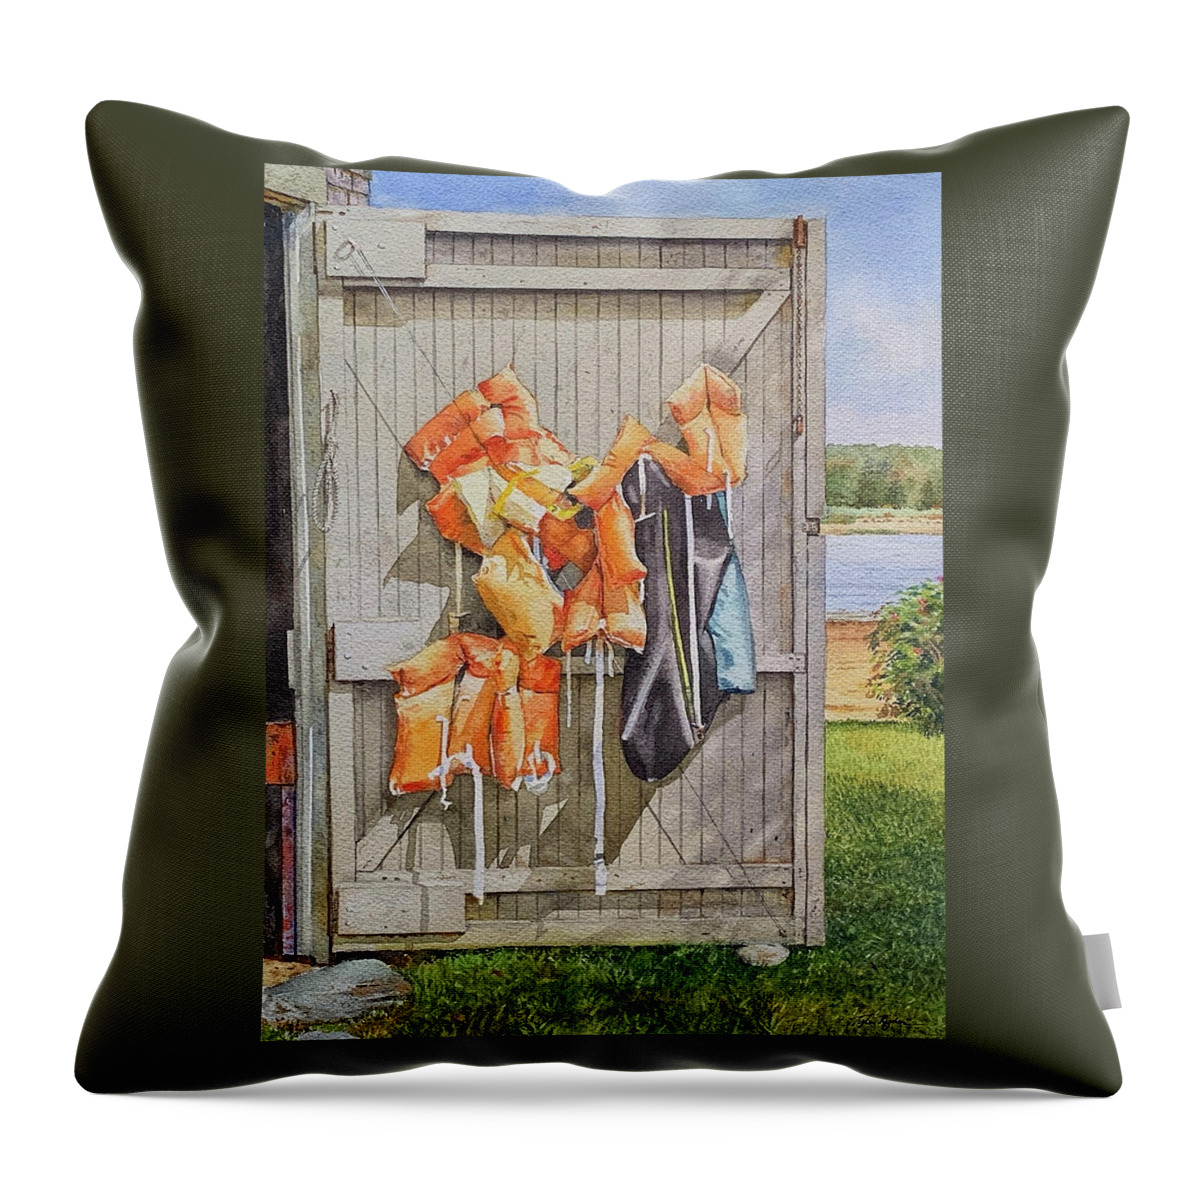  Throw Pillow featuring the painting Safety First by Tyler Ryder